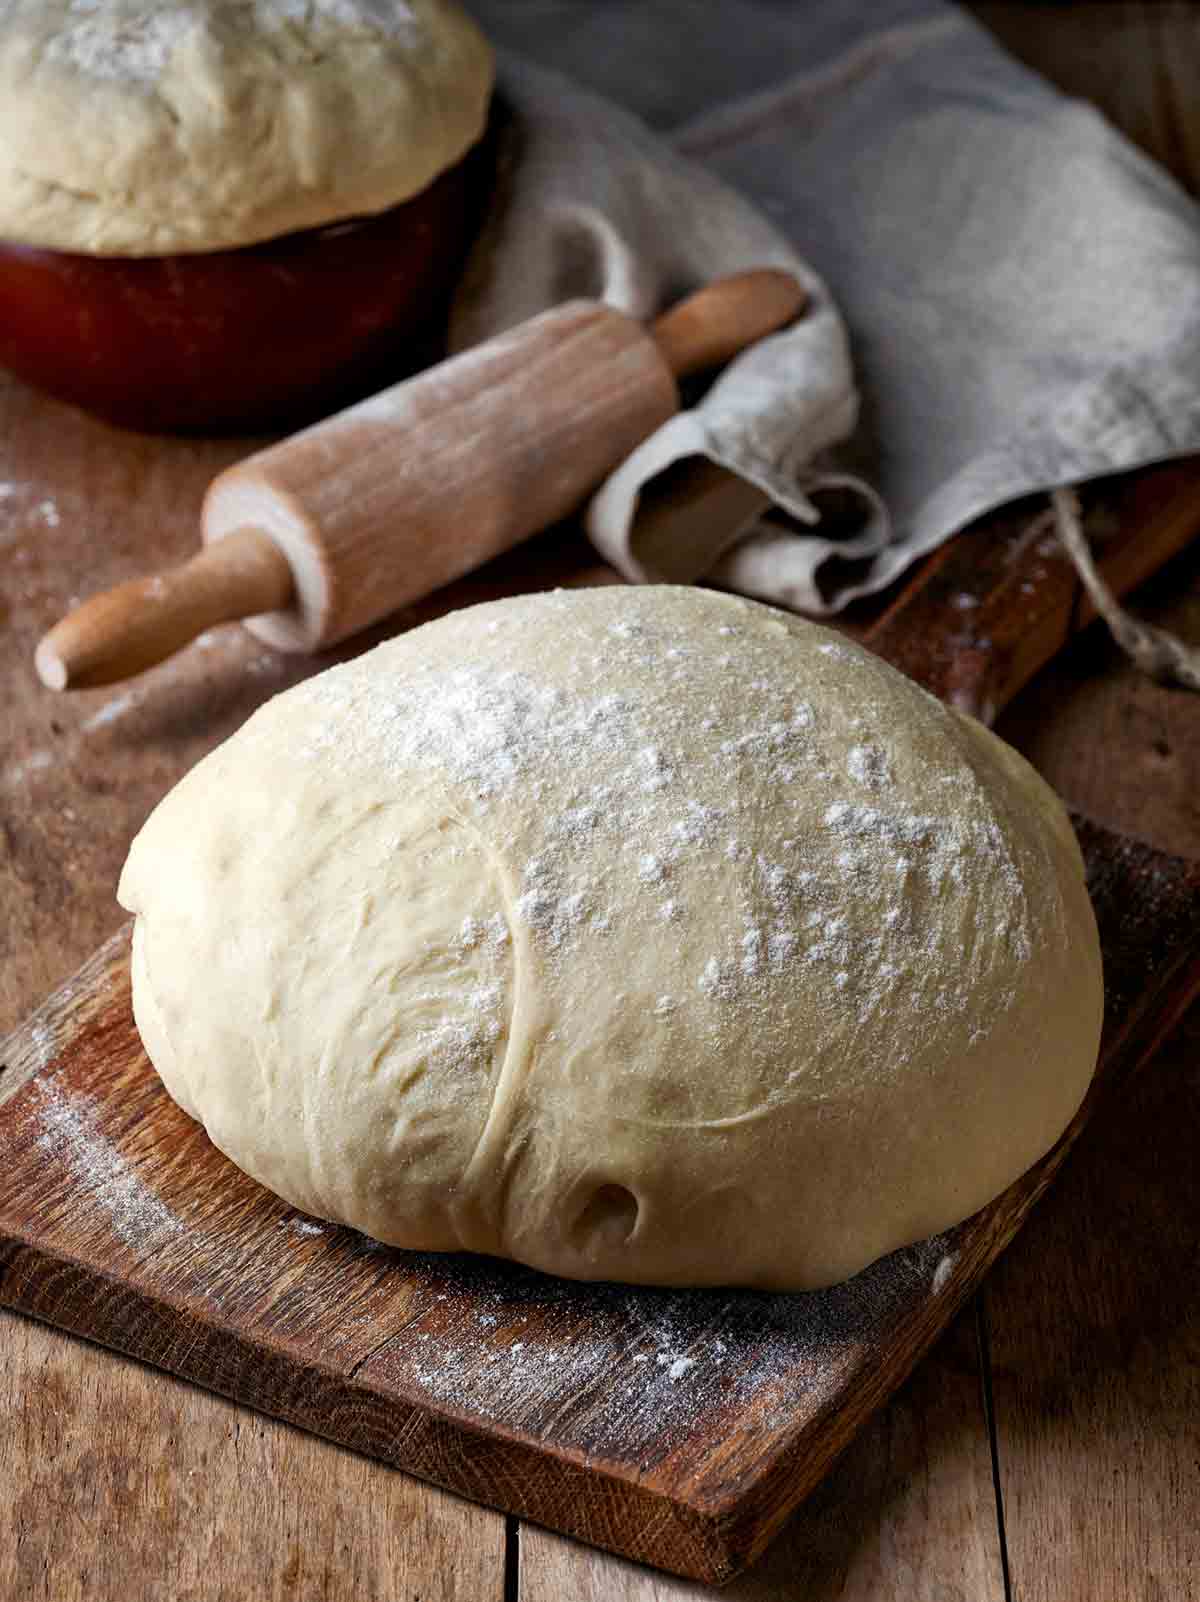 A boule of dough resting on a wooden cutting board with a rolling pin behind it.